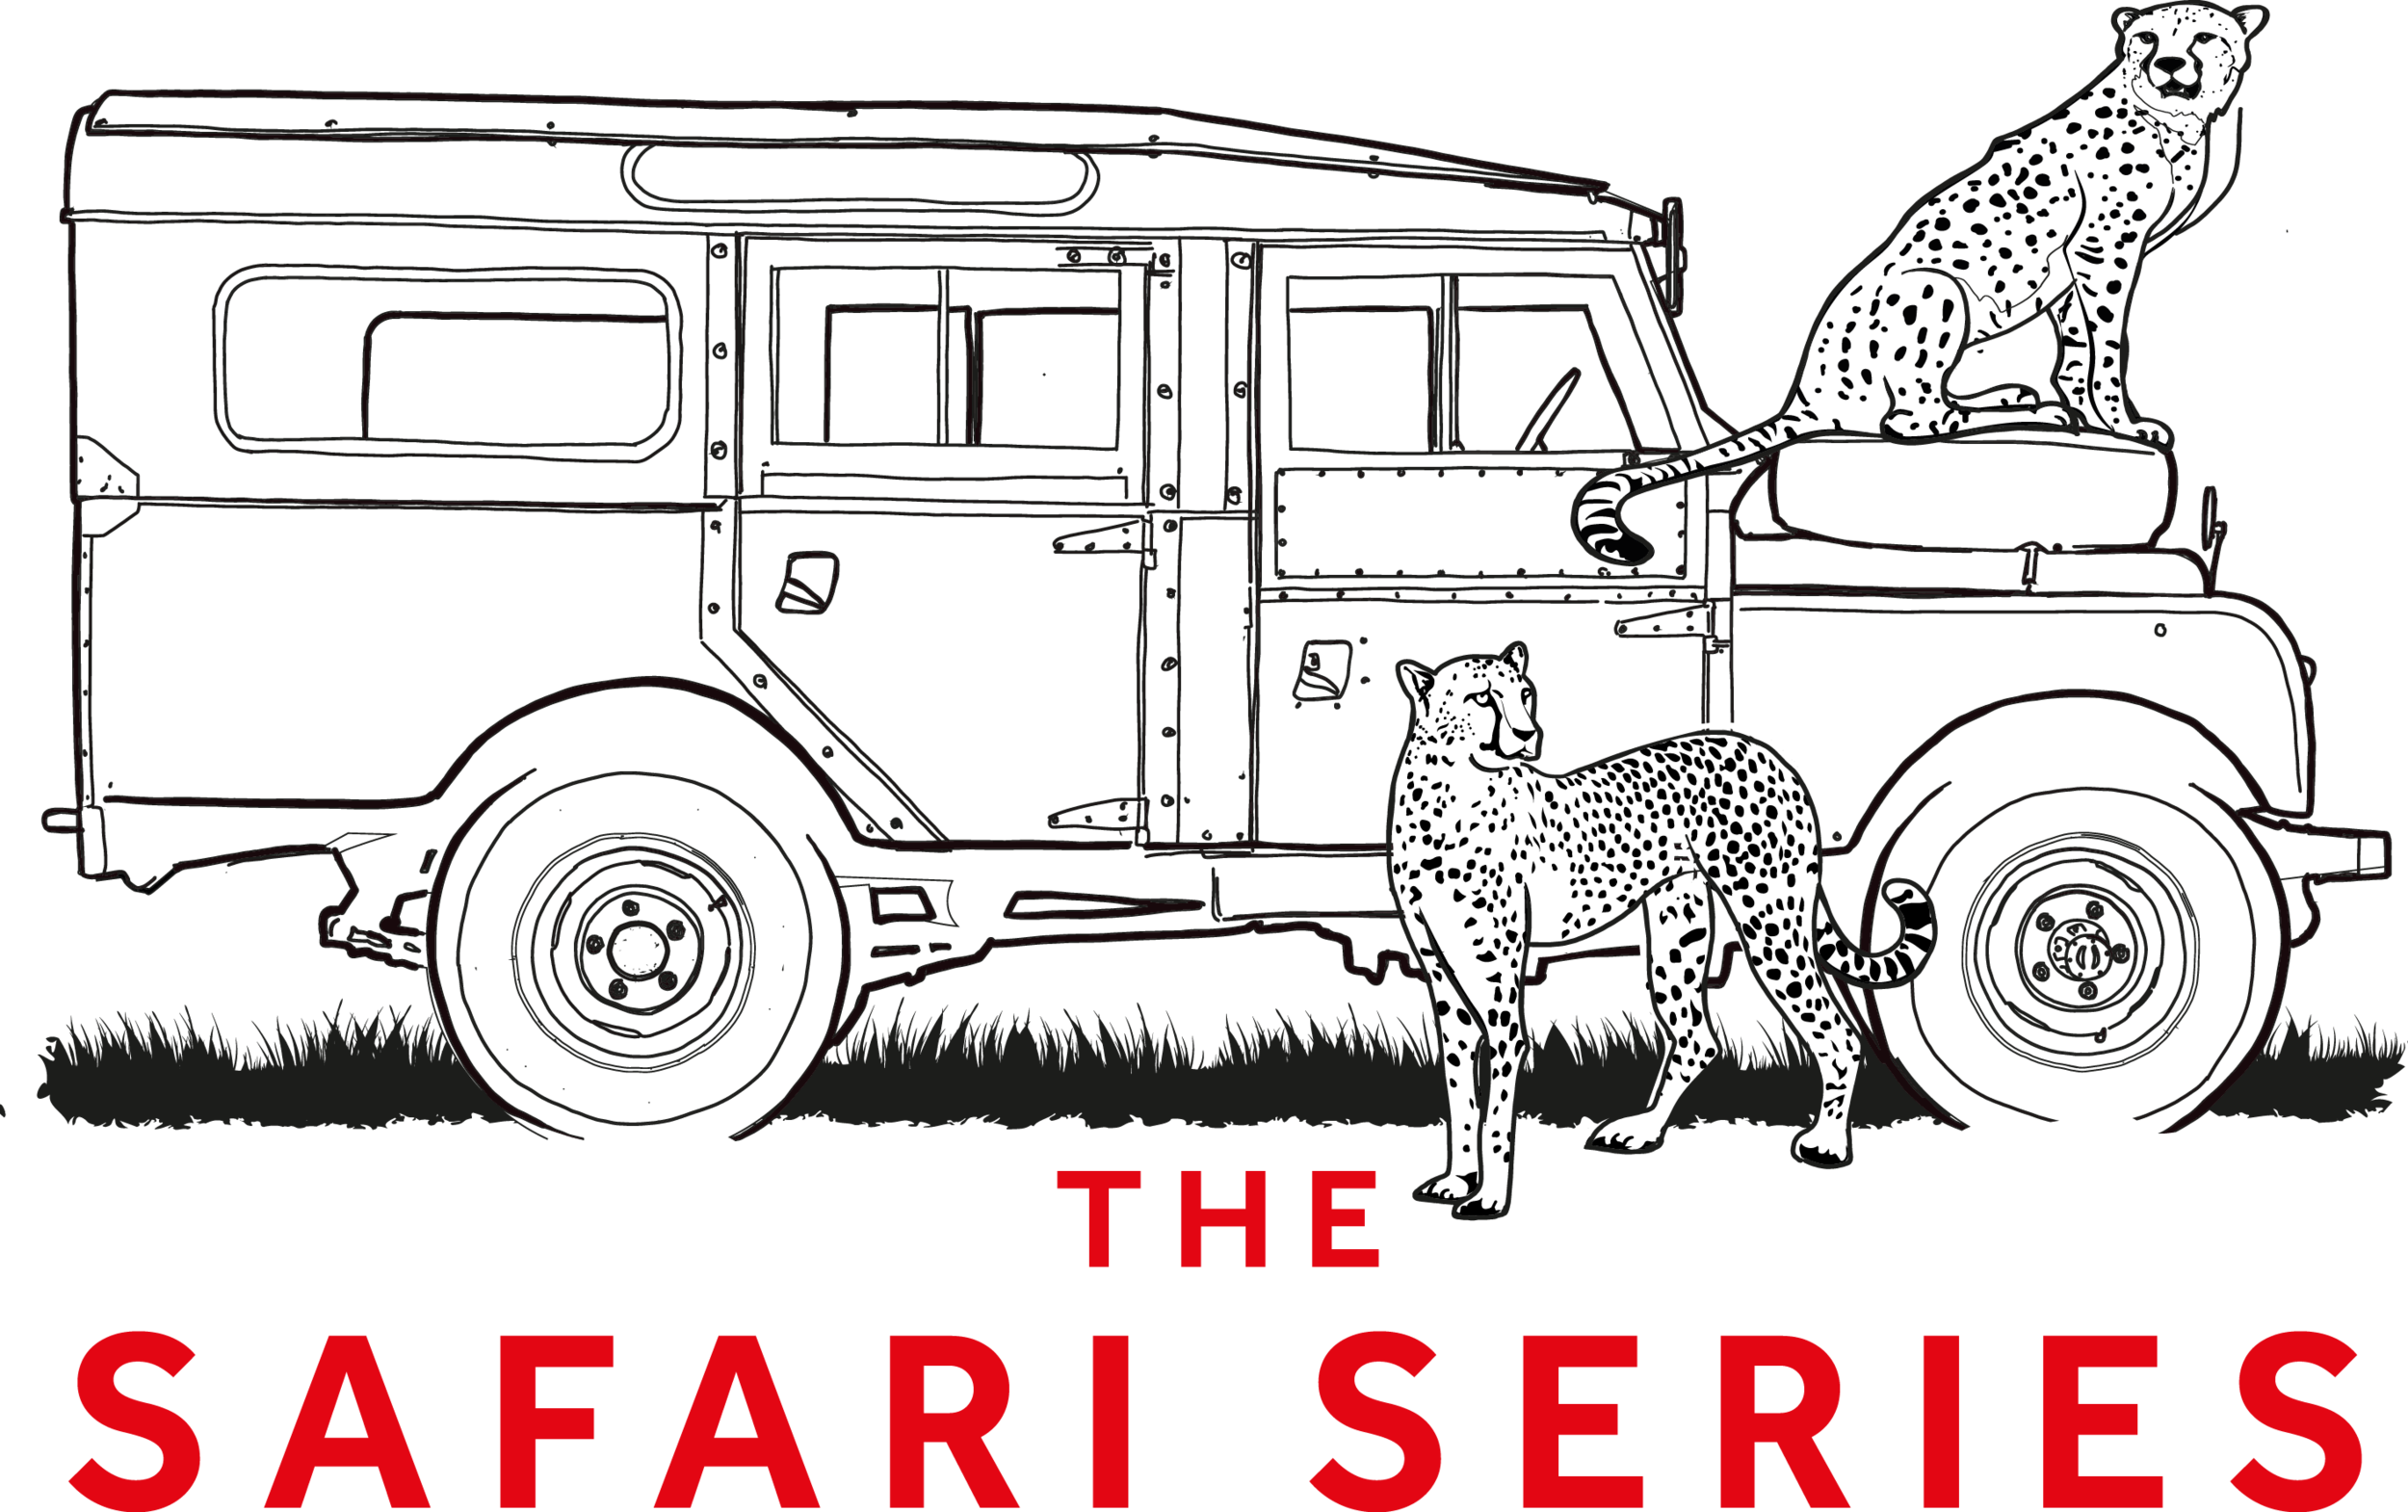 About — The Safari Series